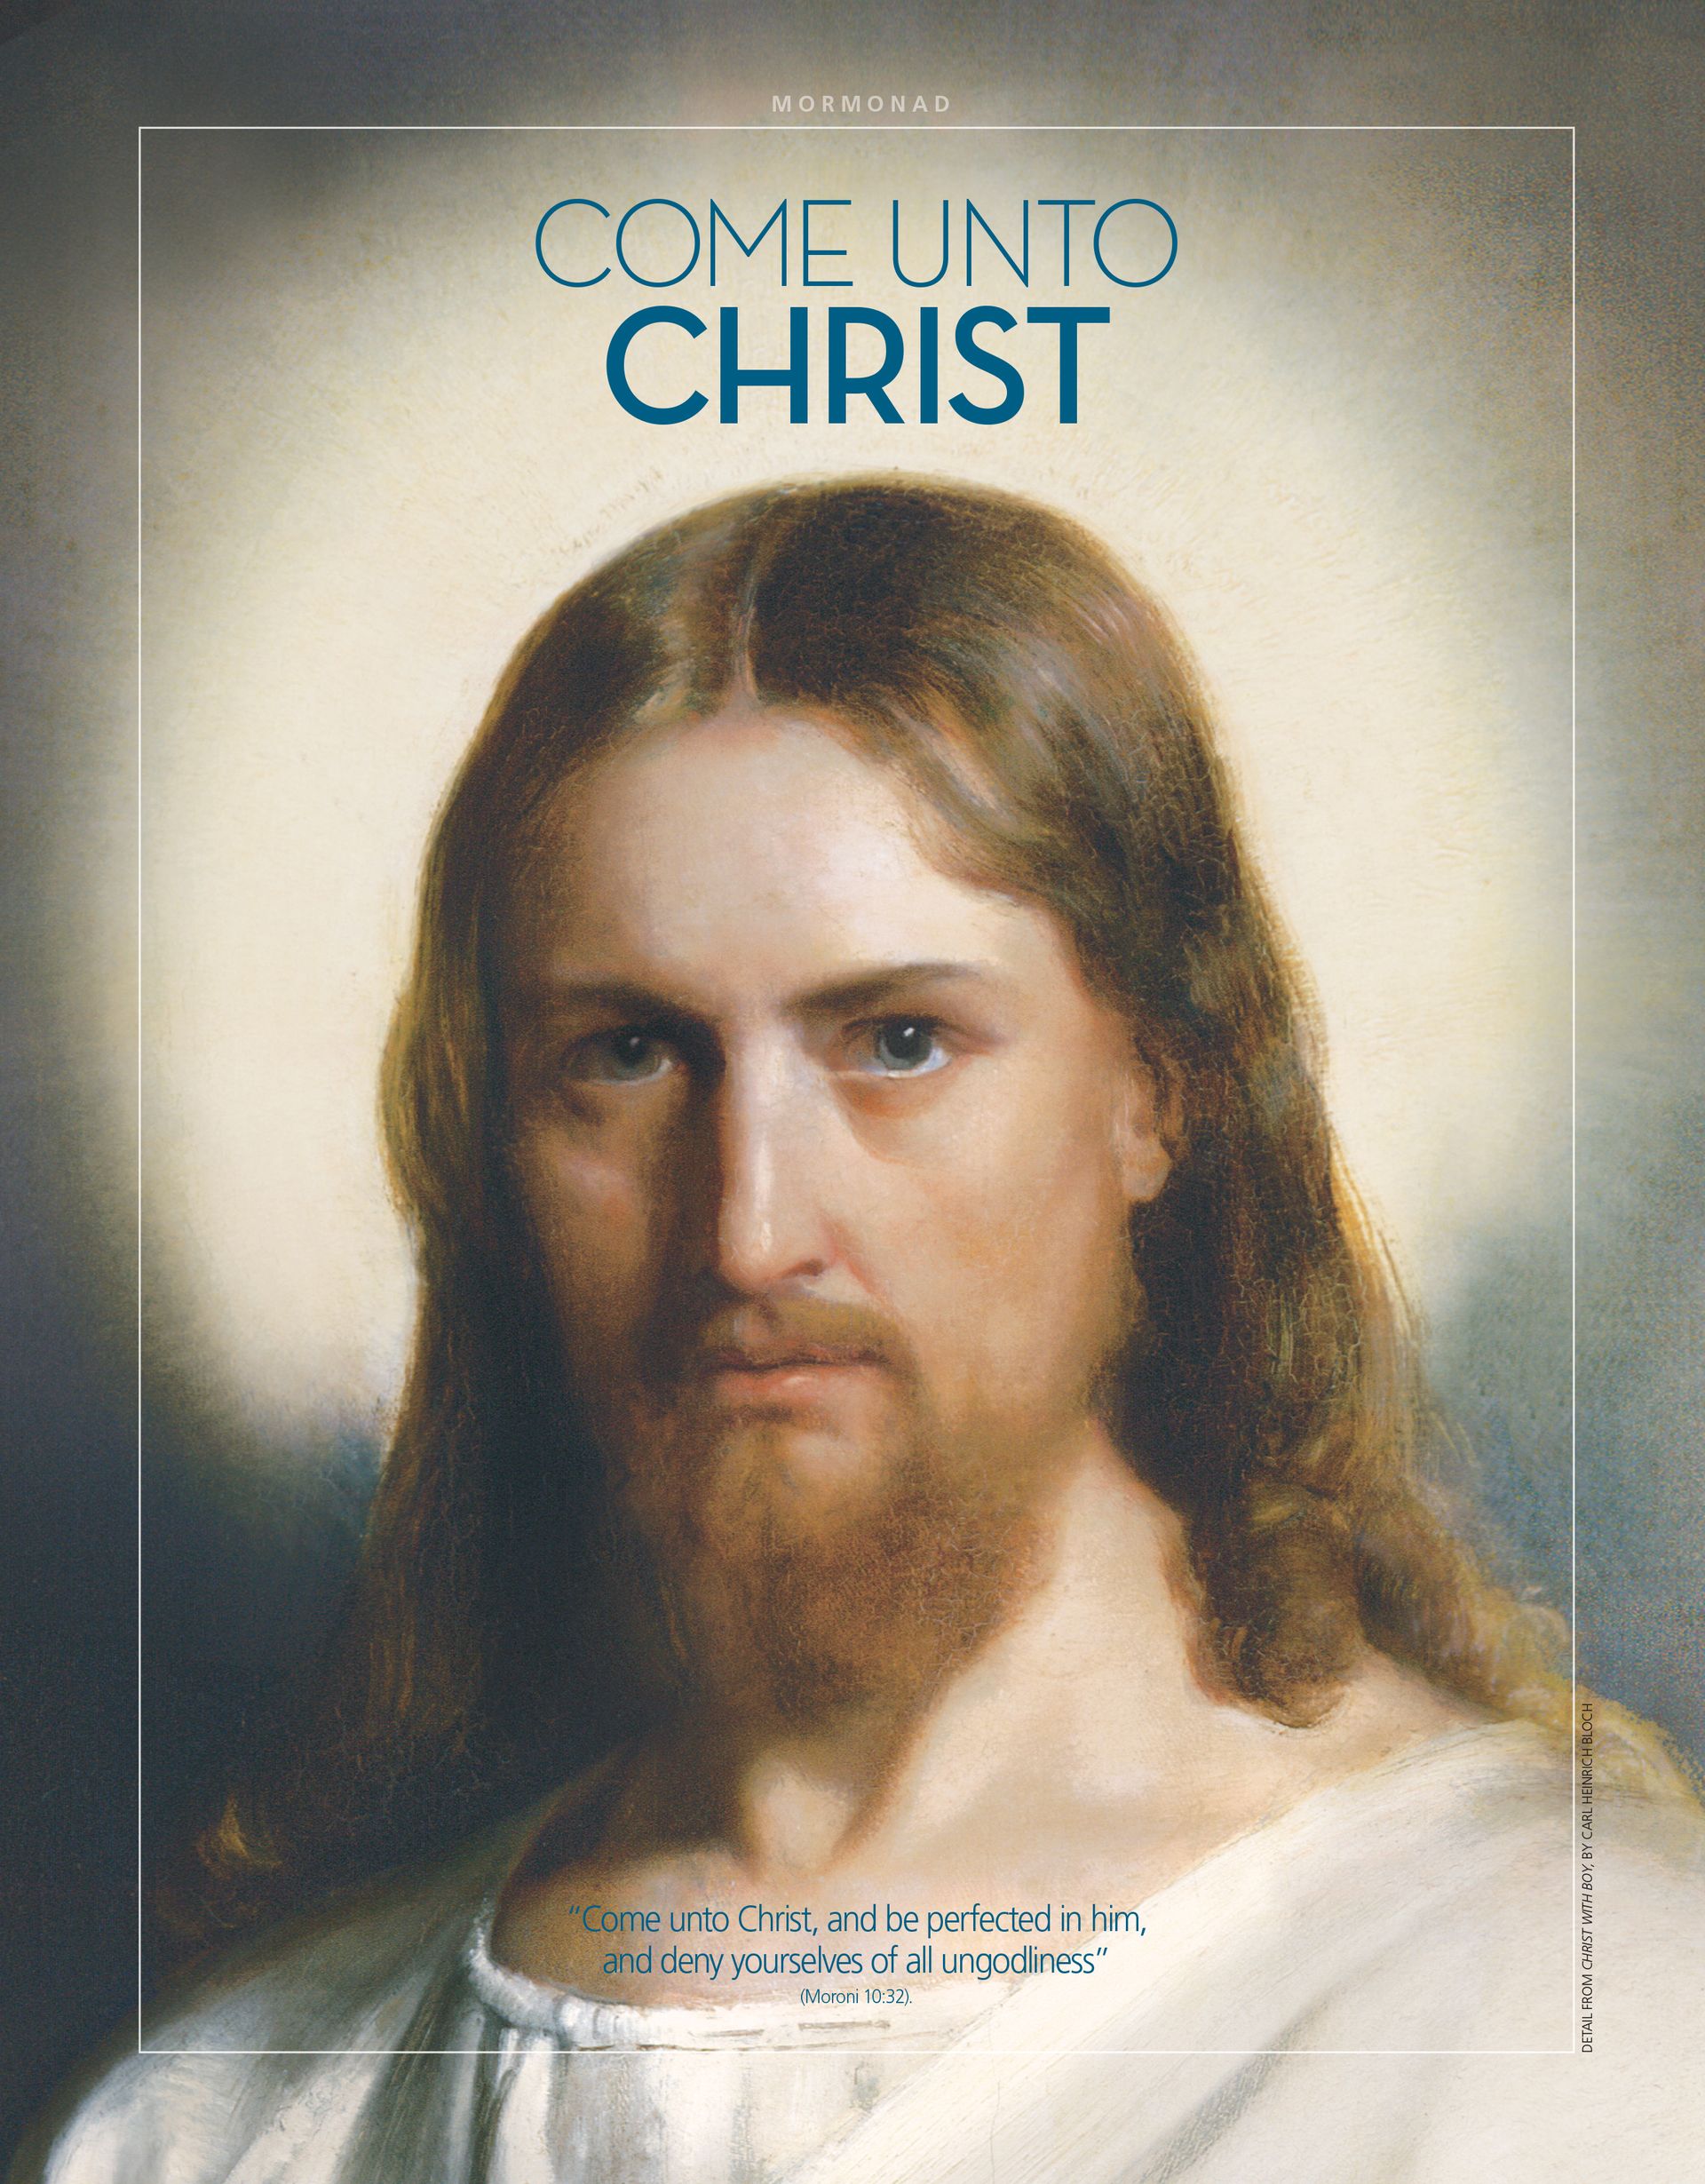 Come unto Christ. “Come unto Christ, and be perfected in him, and deny yourselves of all ungodliness” (Moroni 10:32). Jan. 2014